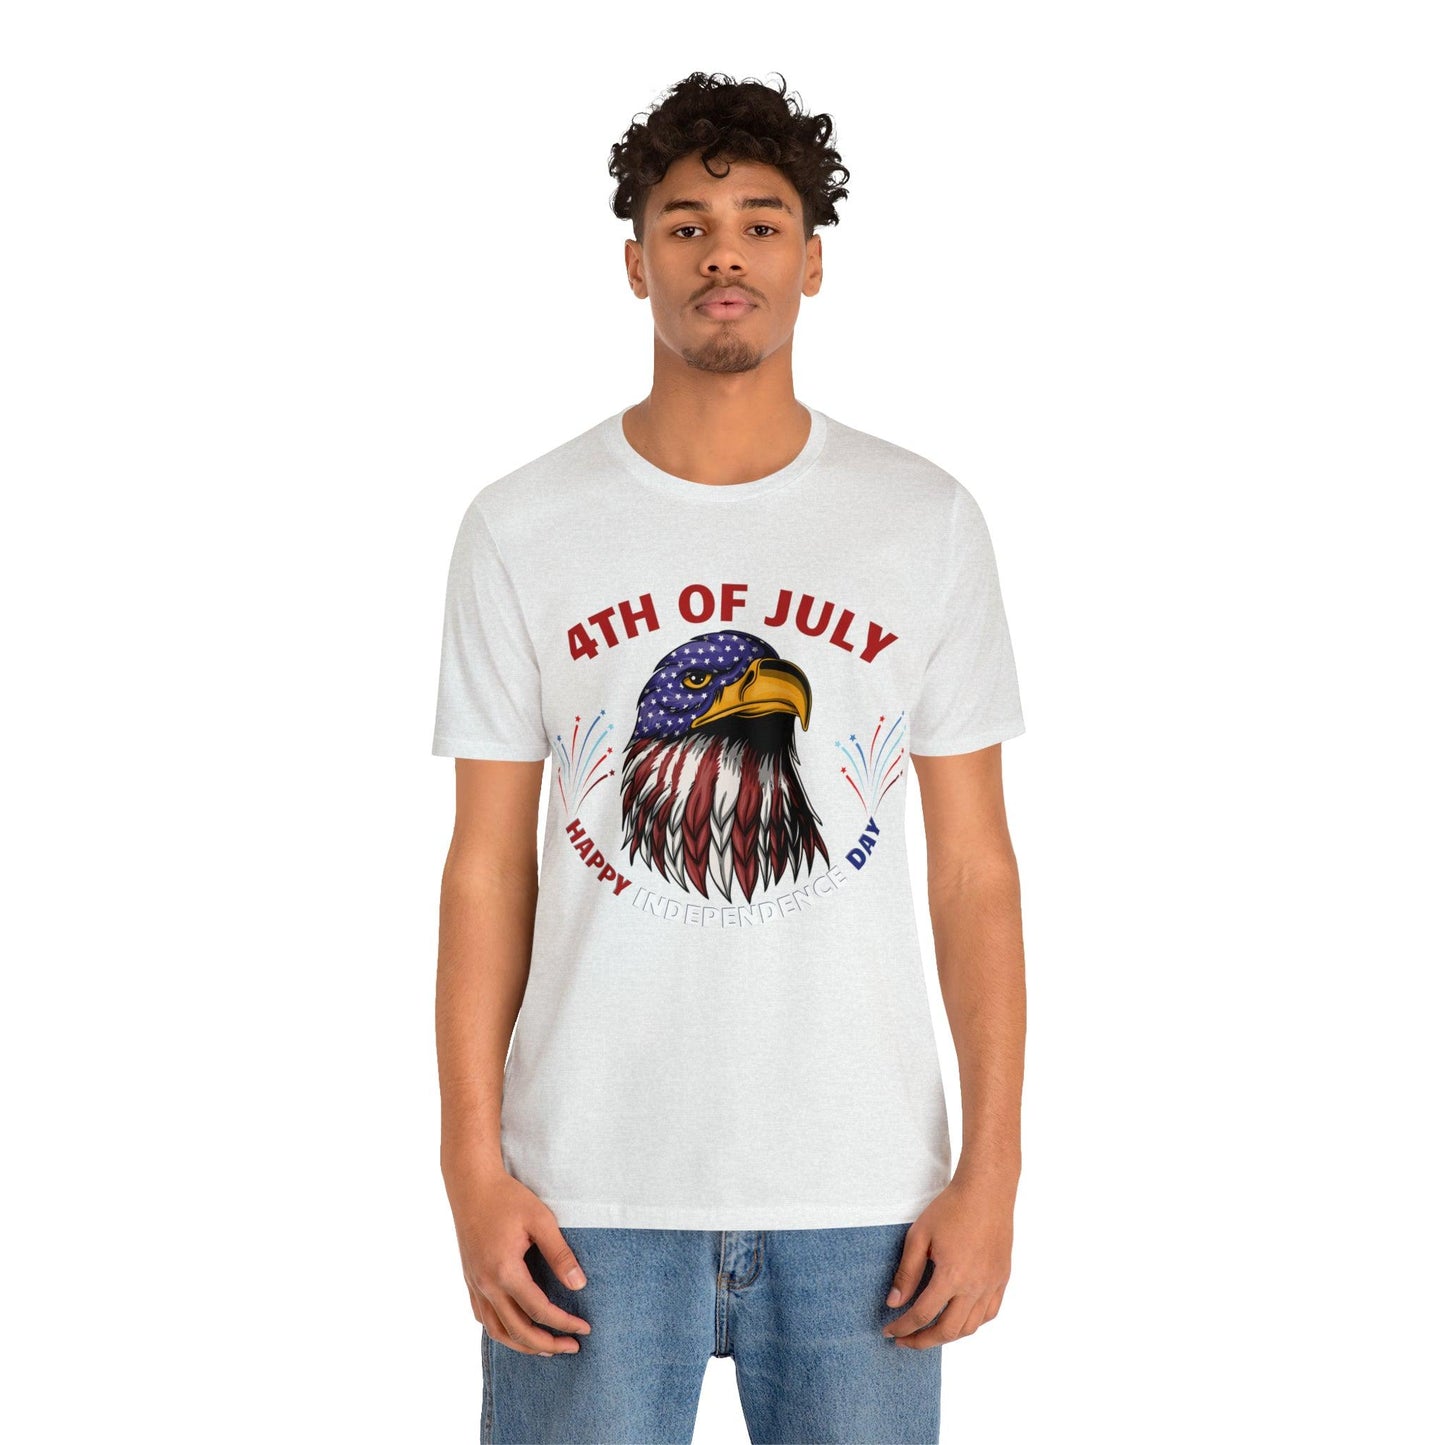 4th of July shirt, Happy Independence Day shirt, Casual Top Tee